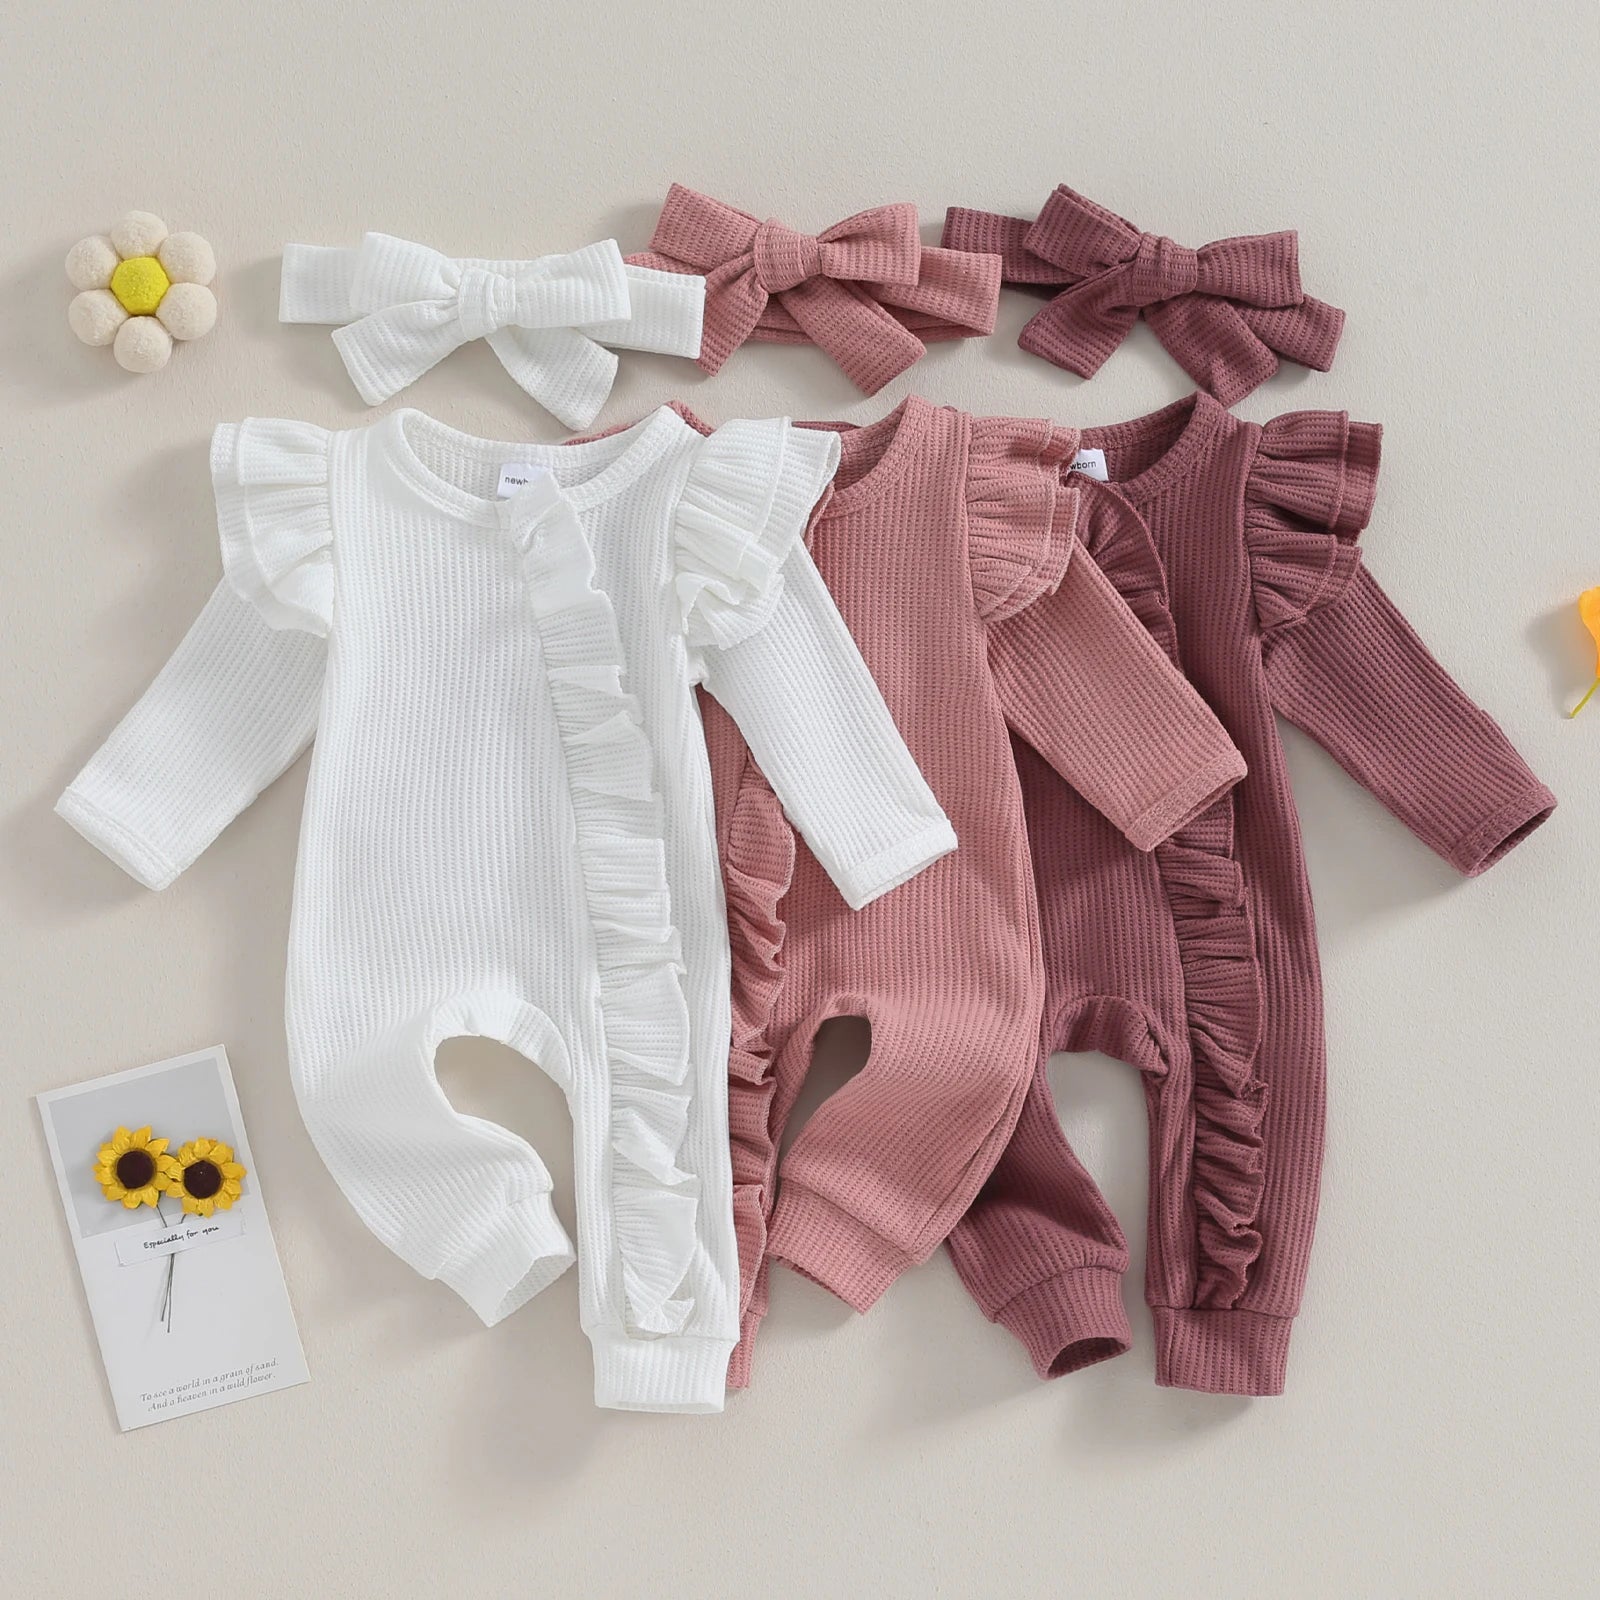 Pudcoco Infant Baby Girl Autumn Jumpsuit Solid Color Round Neck Flying Sleeve Ruffled Zipper Romper with Bow Headband 0-12M